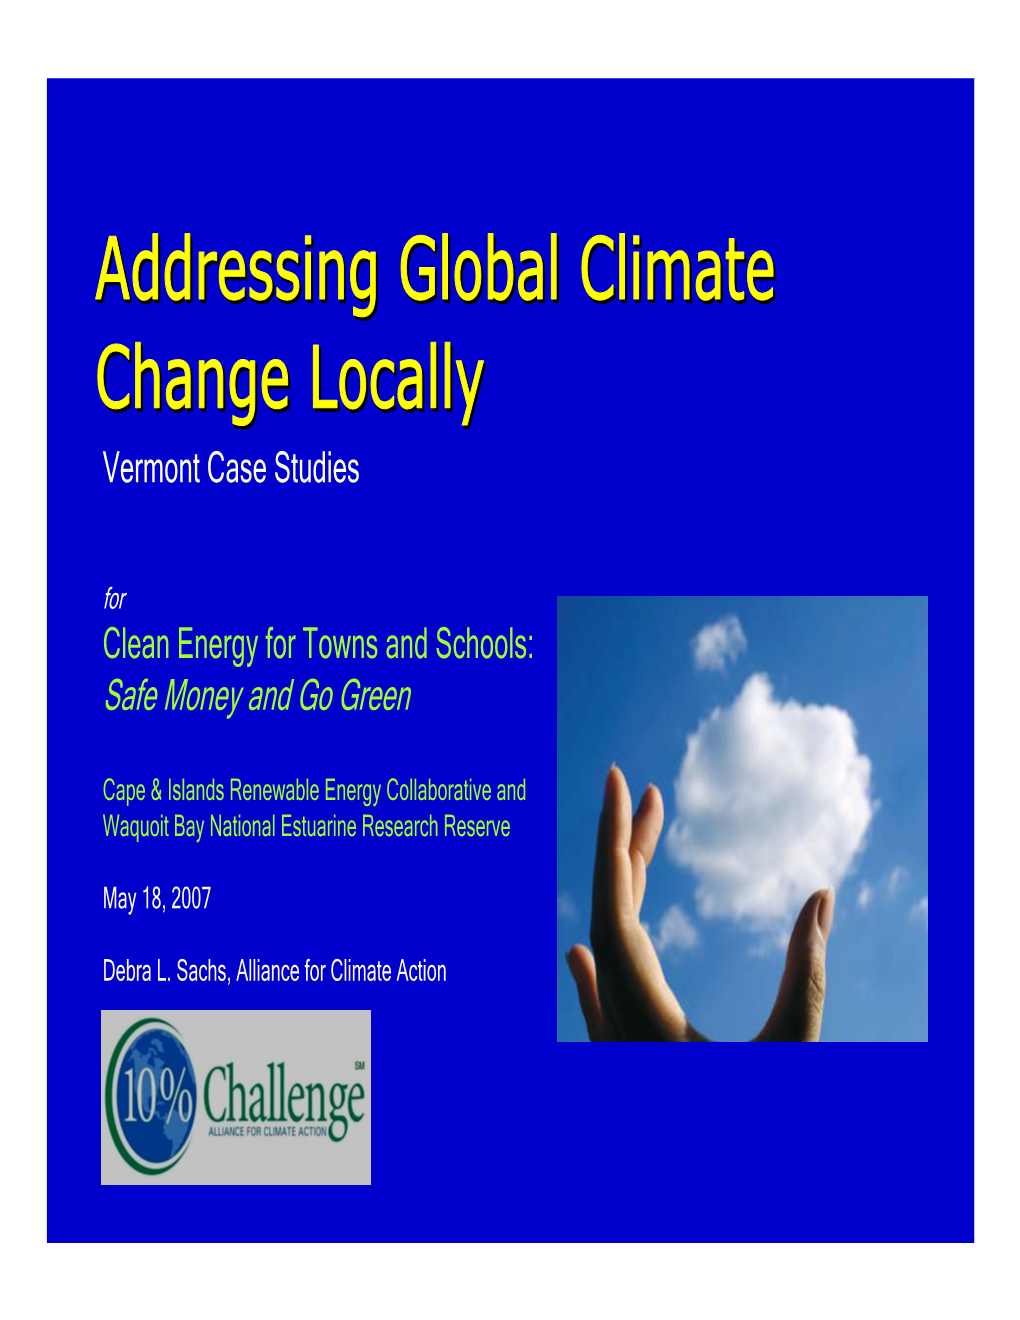 Addressing Global Climate Change Locally